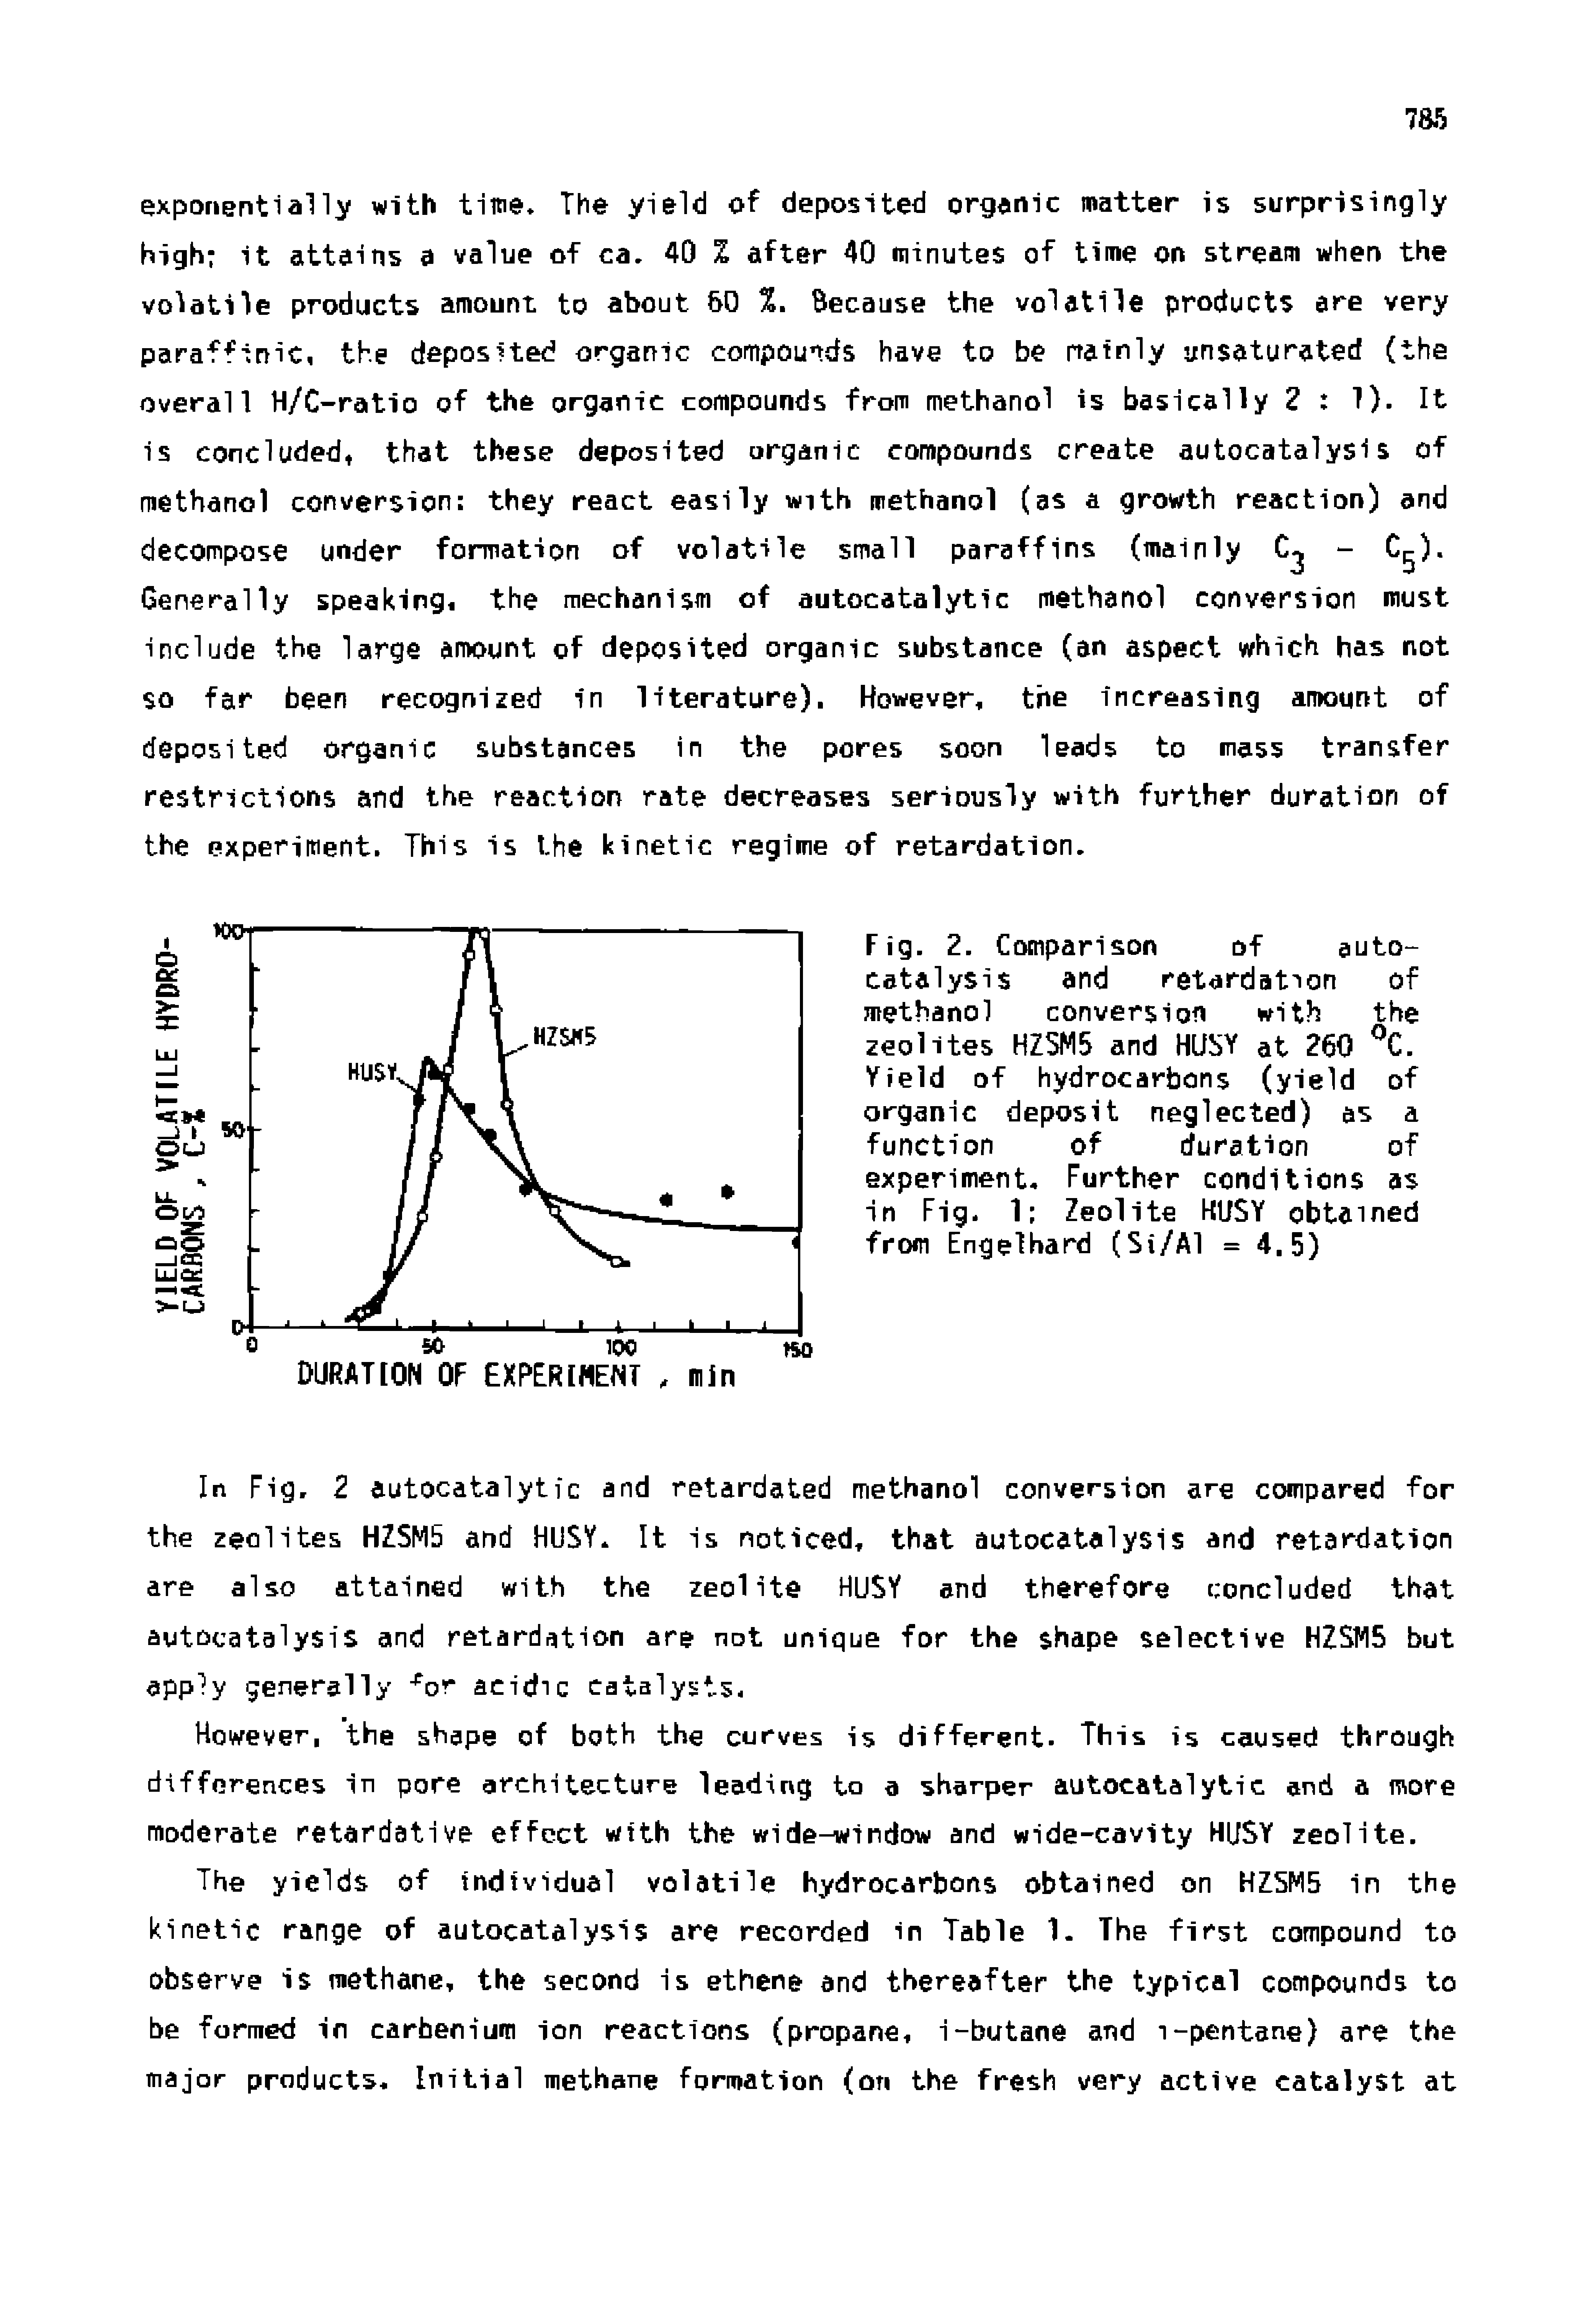 Fig. 2. Comparison of auto-catdlysis and retardation of methanol conversion with the zeolites HZSM5 and HLfSY at 260 C. Yield of hydrocarbons (yield of organic deposit neglected) as a function of duration of experiment. Further conditions as in Fig. 1 Zeolite HUSY obtained from Engelhard (Si/Al = 4.5)...